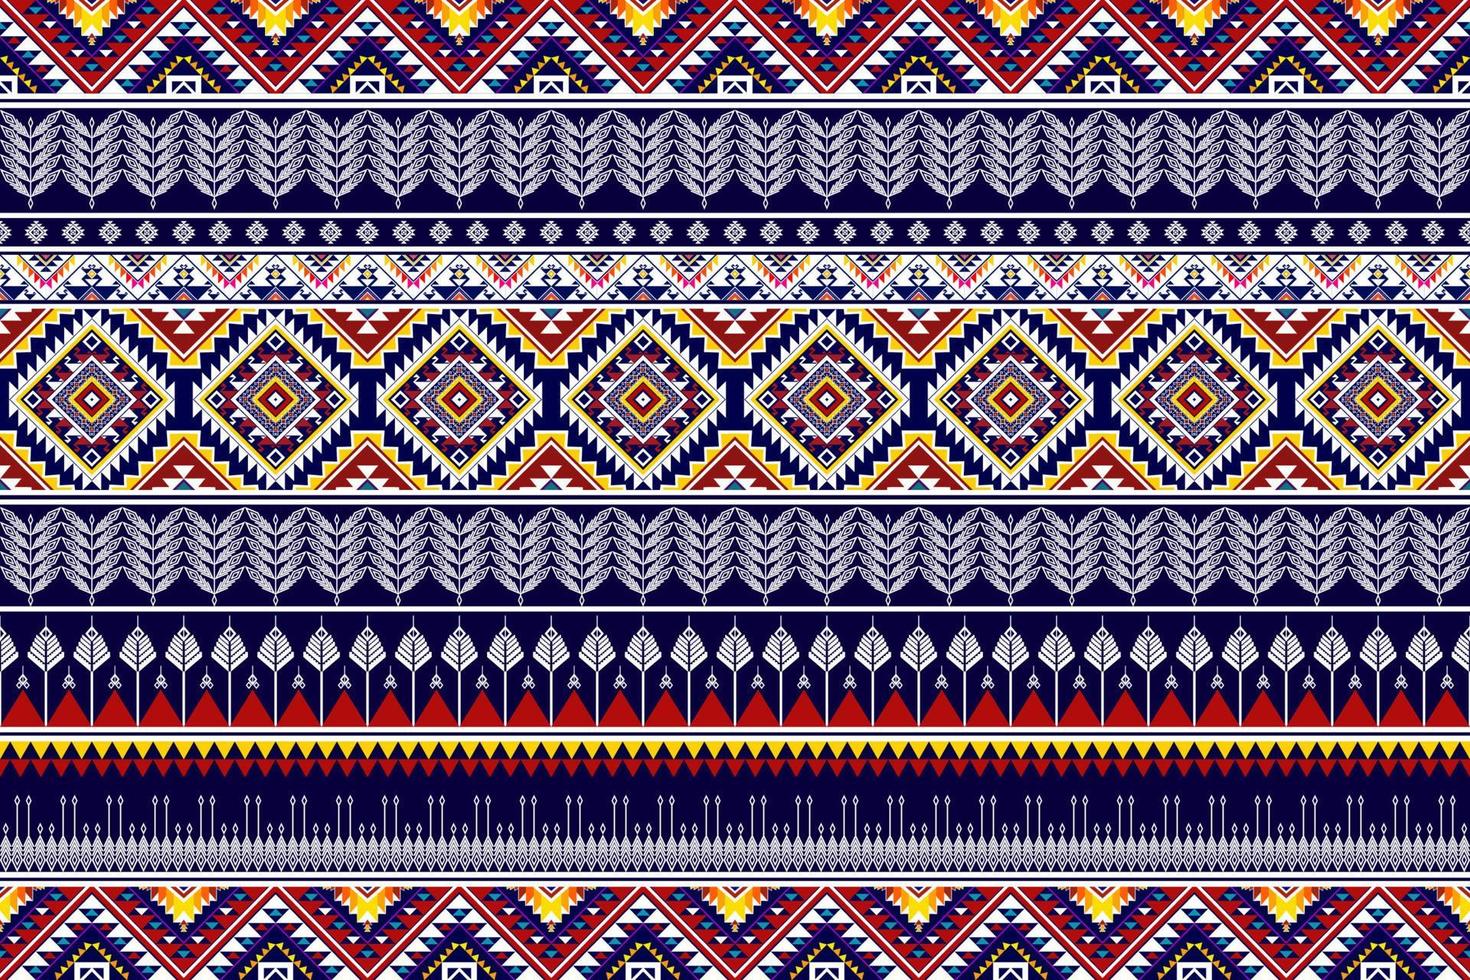 Geometric abstract ethnic pattern design. Aztec fabric carpet mandala ornaments textile decorations wallpaper. Tribal boho native ethnic turkey traditional embroidery vector background